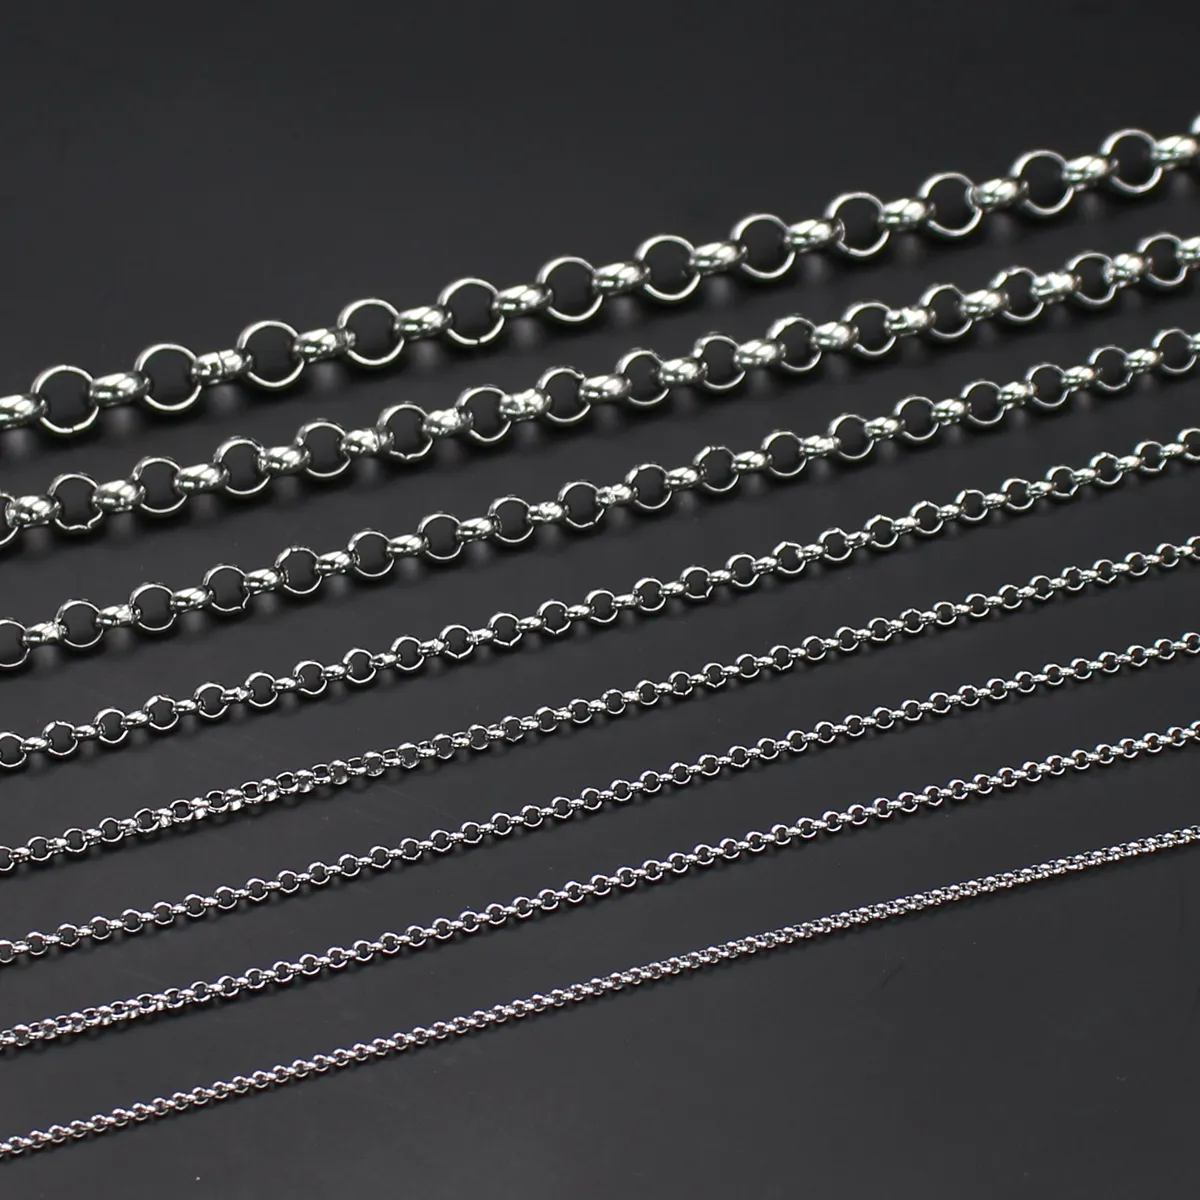 12meter whole stainless steel Round Rolo Chain Link DIY Jewelry Marking findings chains 2 5mm 3mm 4mm 6mm299b